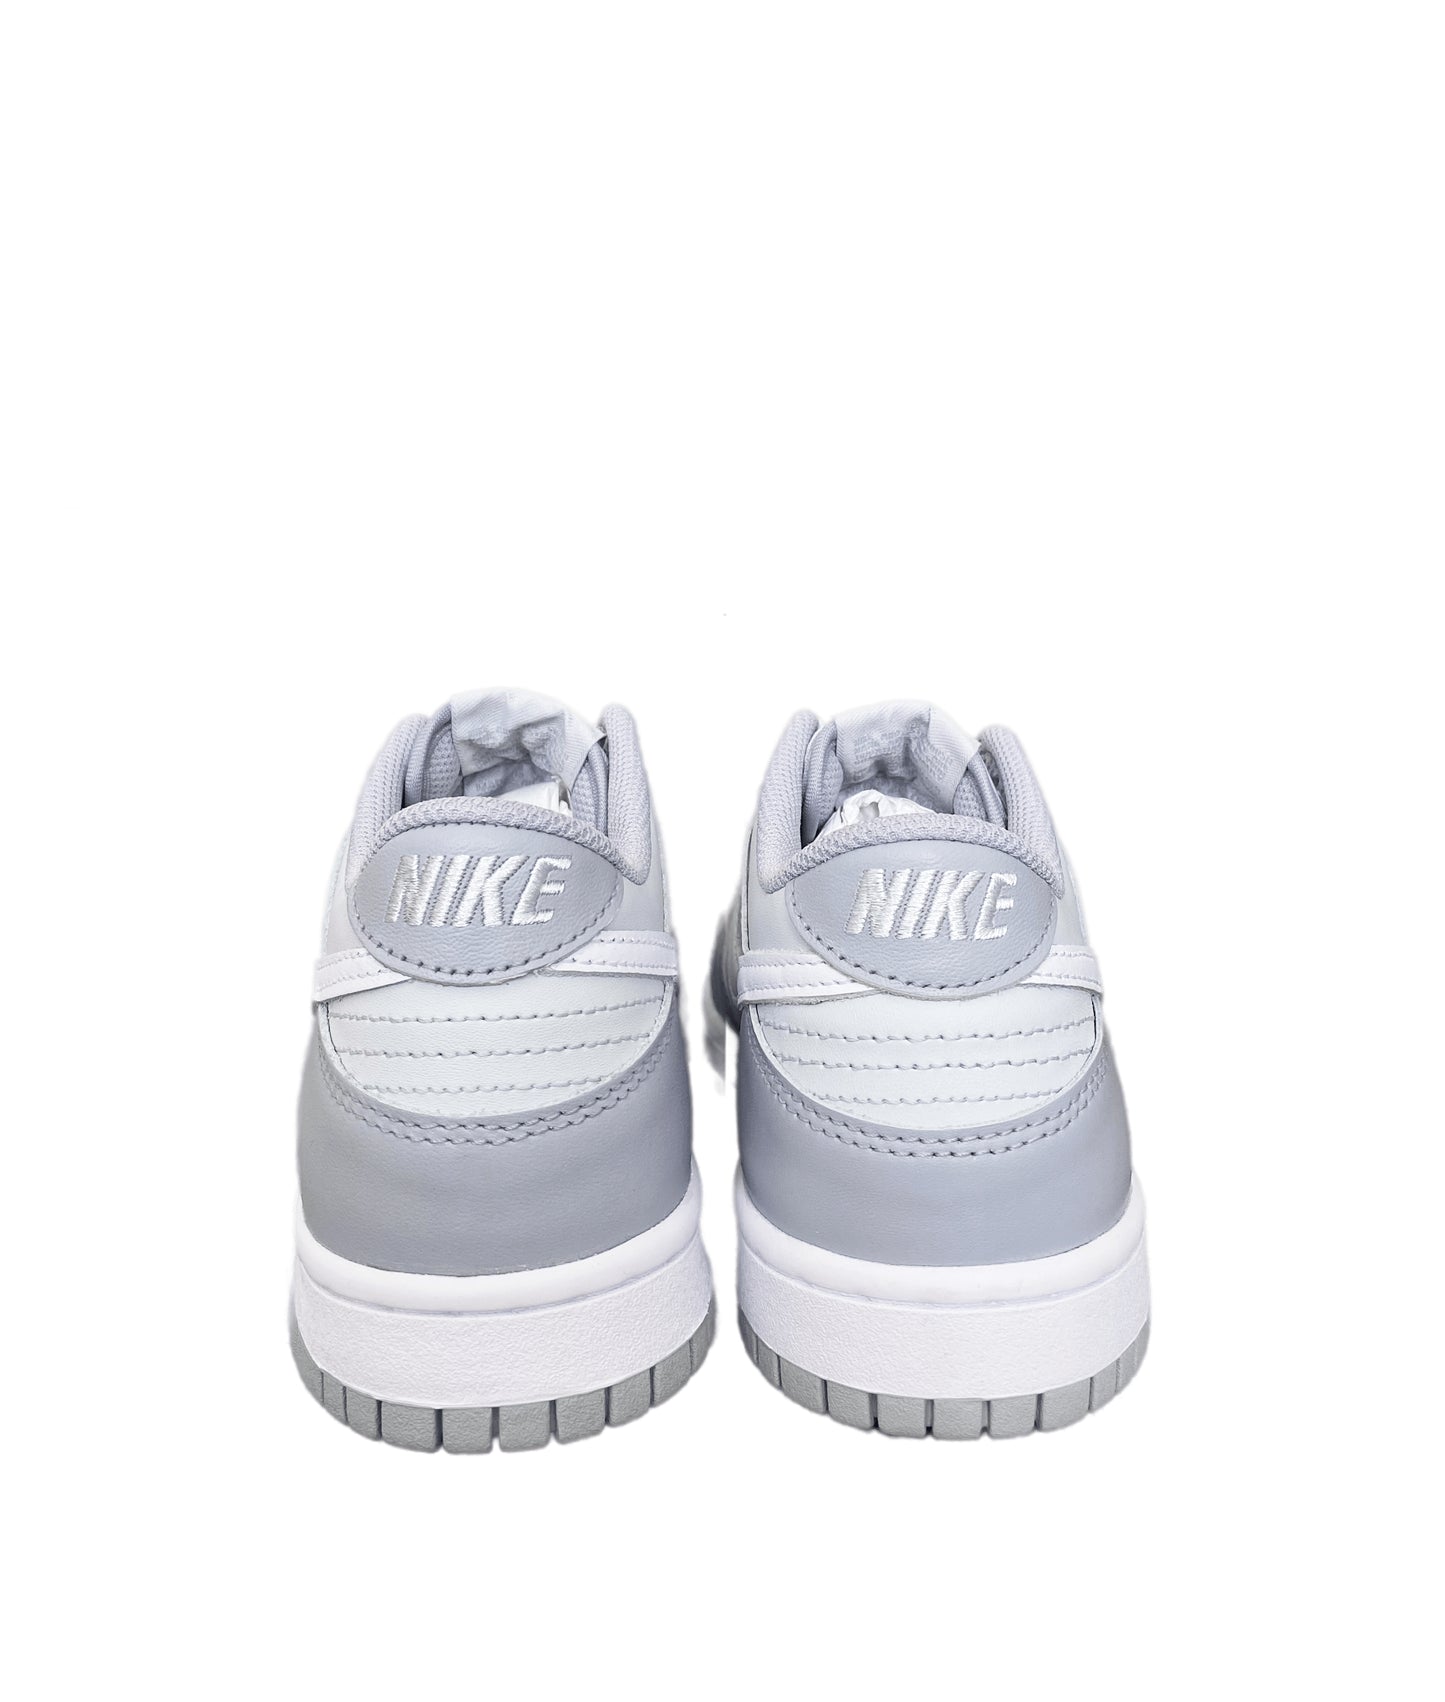 NIKE DUNK LOW "TWO TONED GREY" (GS)